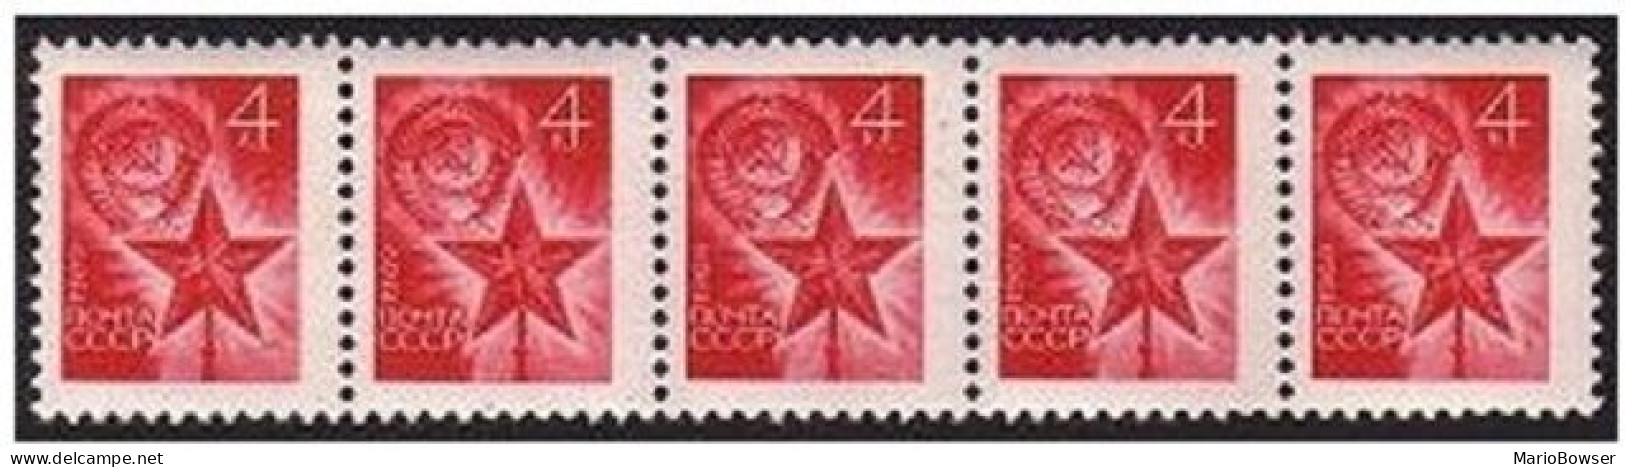 Russia 3670 Coil Strip Of 5,one With Number,MNH.Michel 3697. Arms Of USSR,Star. - Nuovi